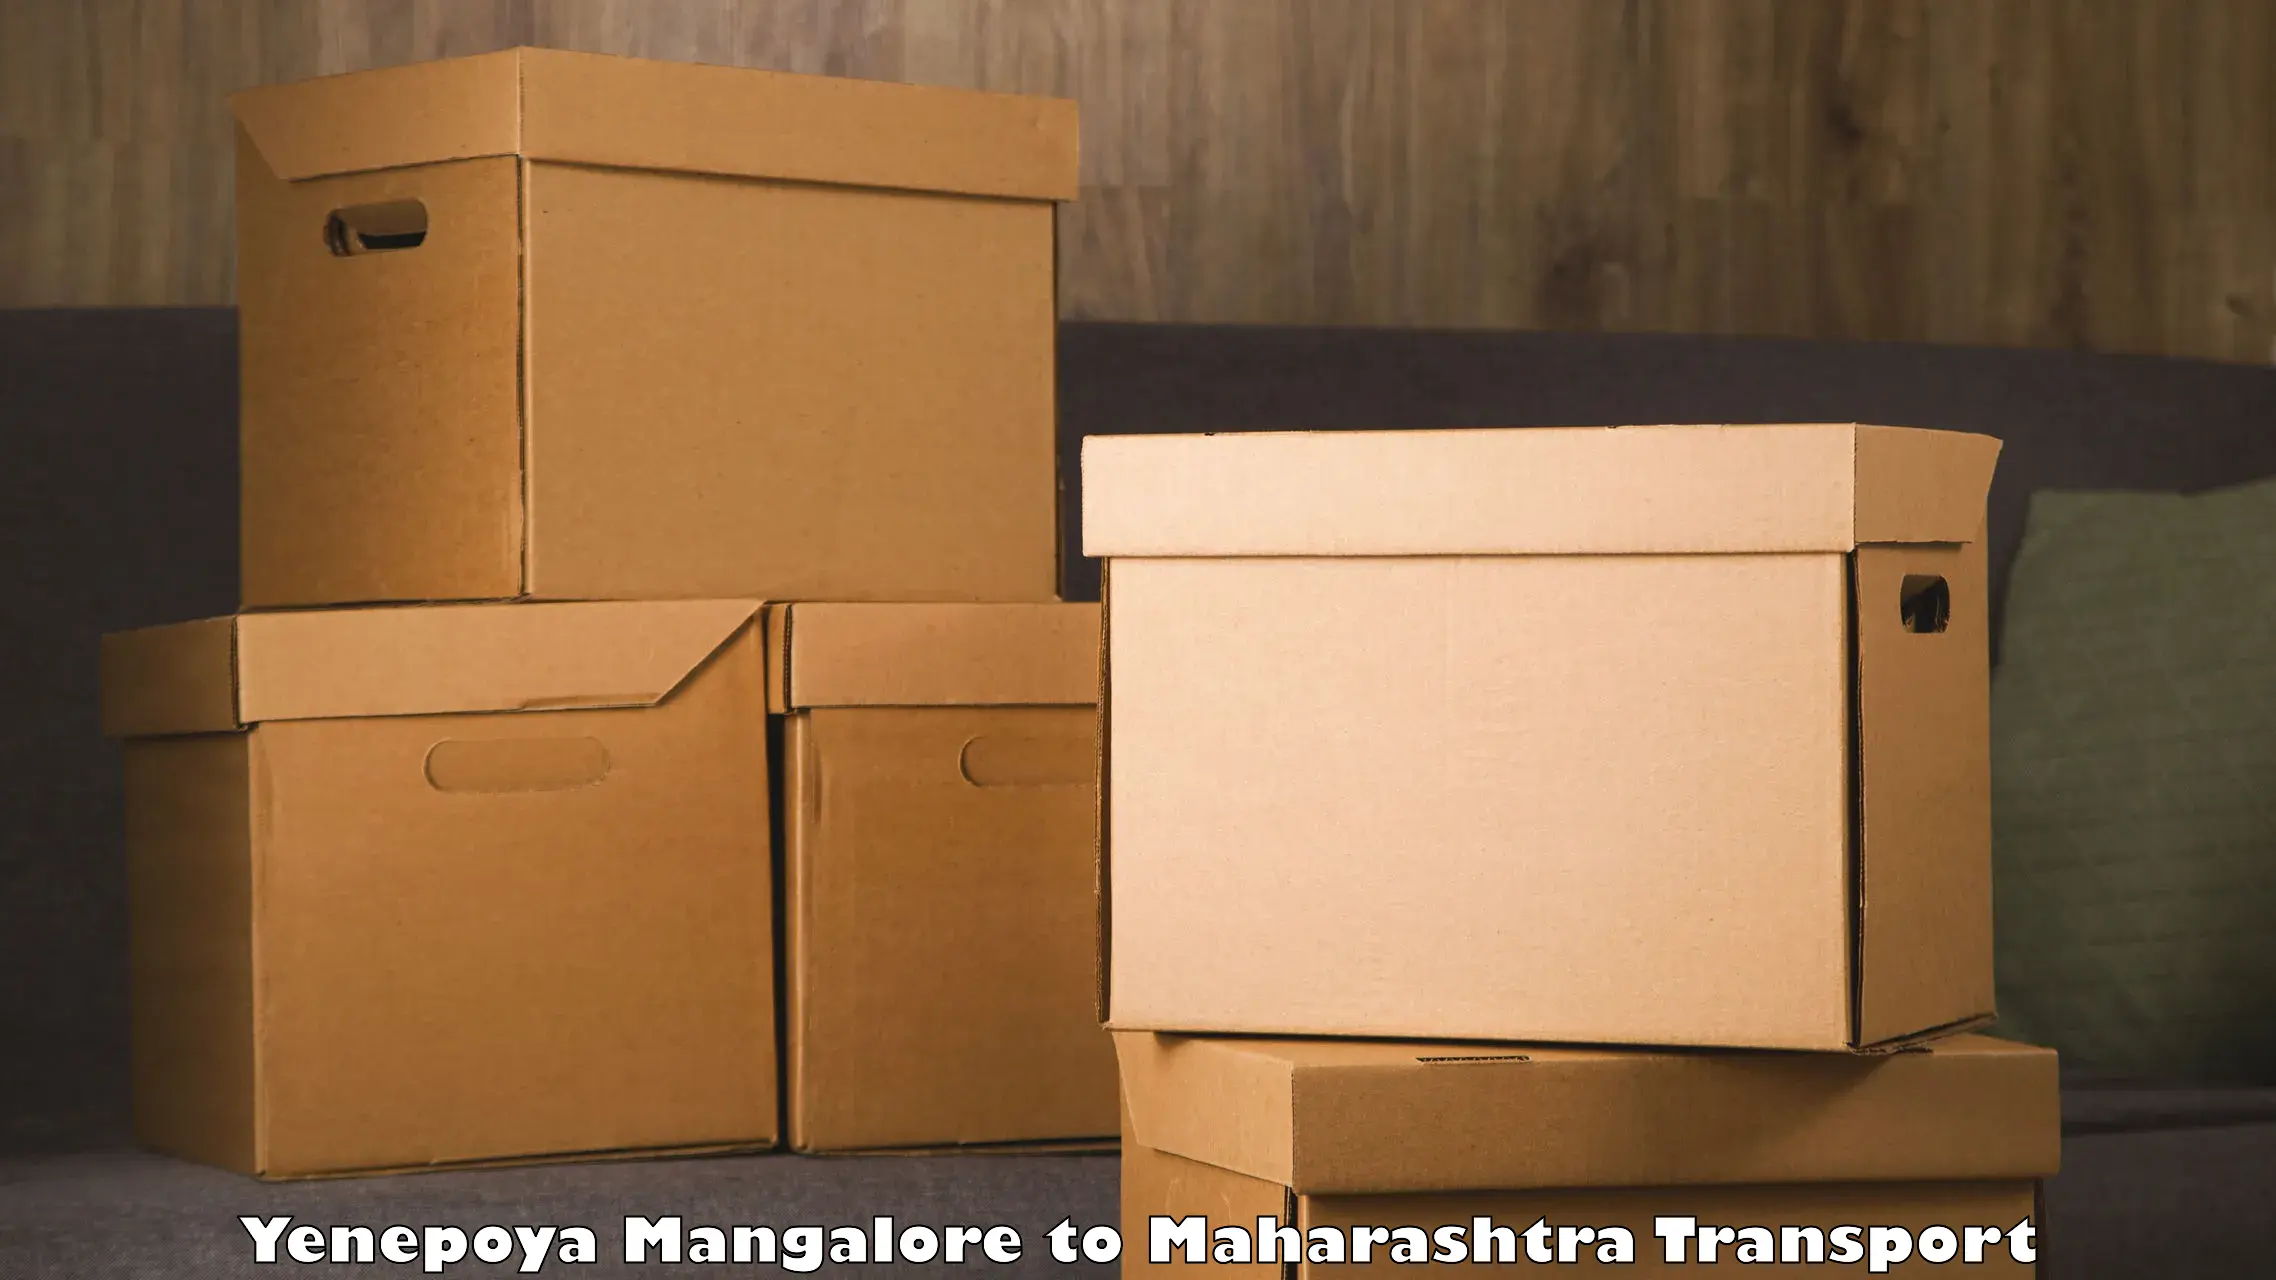 Air freight transport services in Yenepoya Mangalore to Bhandara